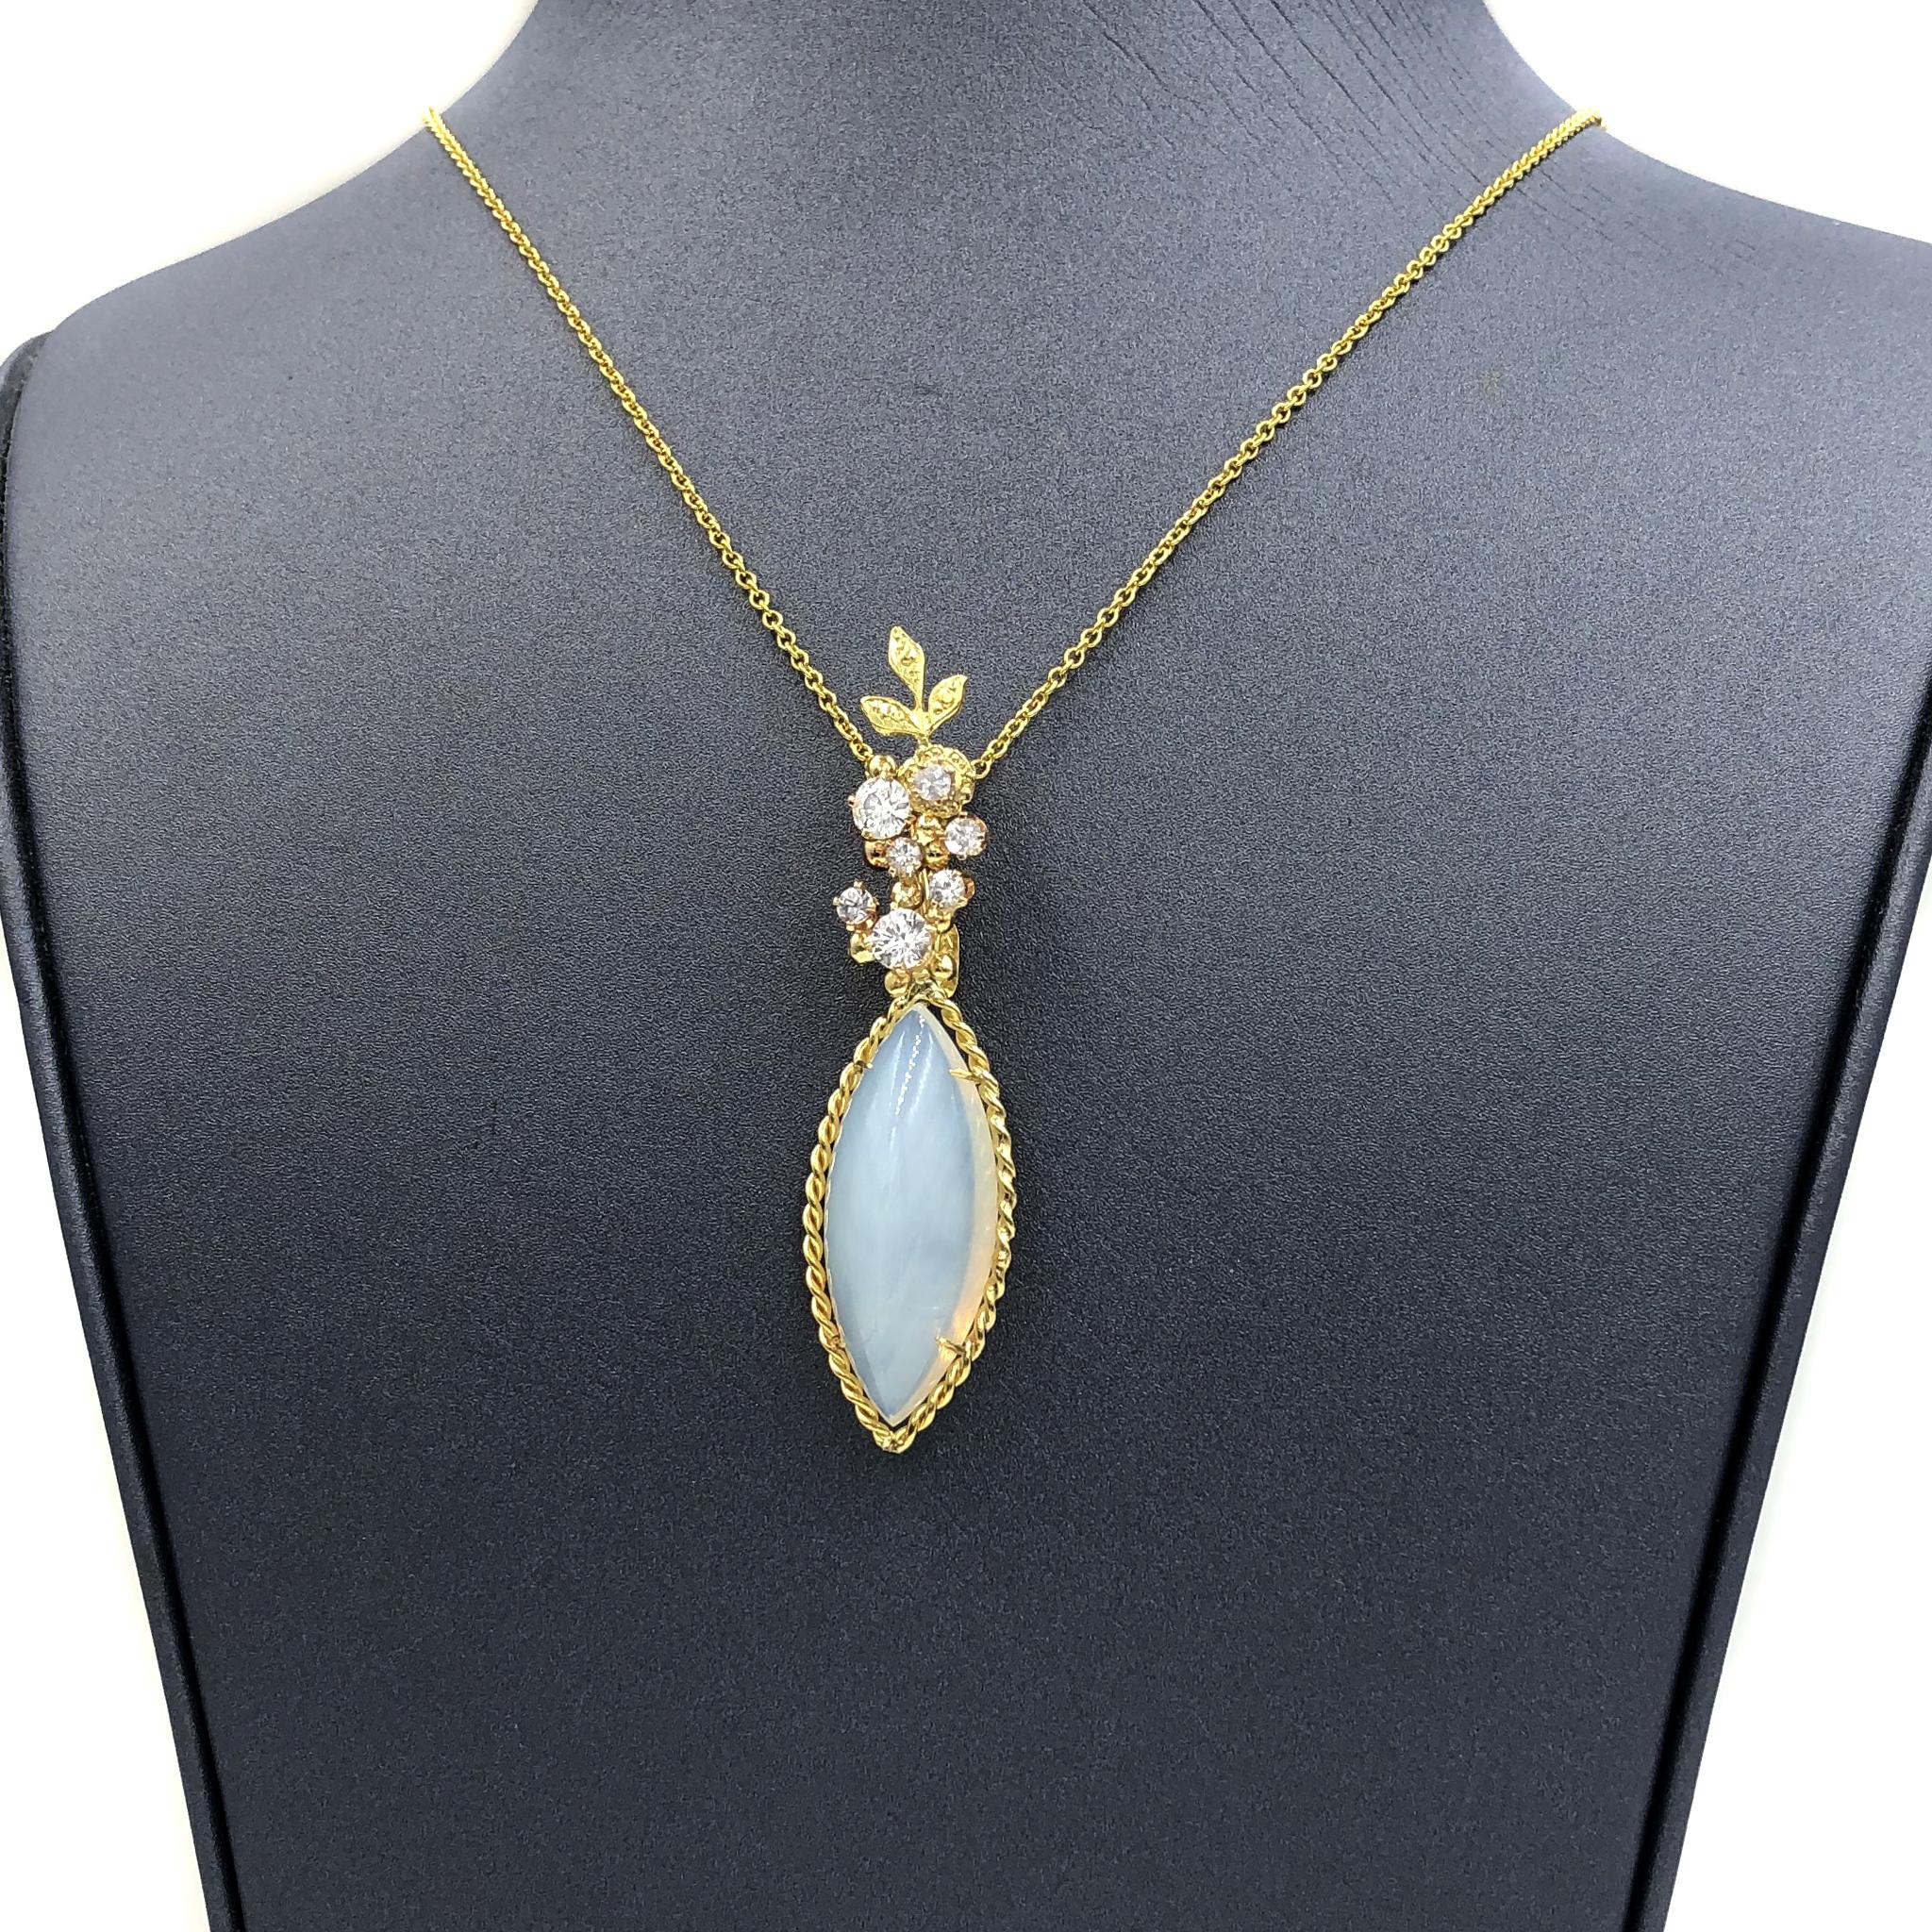 One of a Kind Necklace by acclaimed jewelry maker Russell Trusso featuring a spectacular milky marquise chalcedony cabochon with a subtle yellow-orange glows. The gem is wrapped in a handmade 18k yellow gold setting and sits beneath seven shimmering